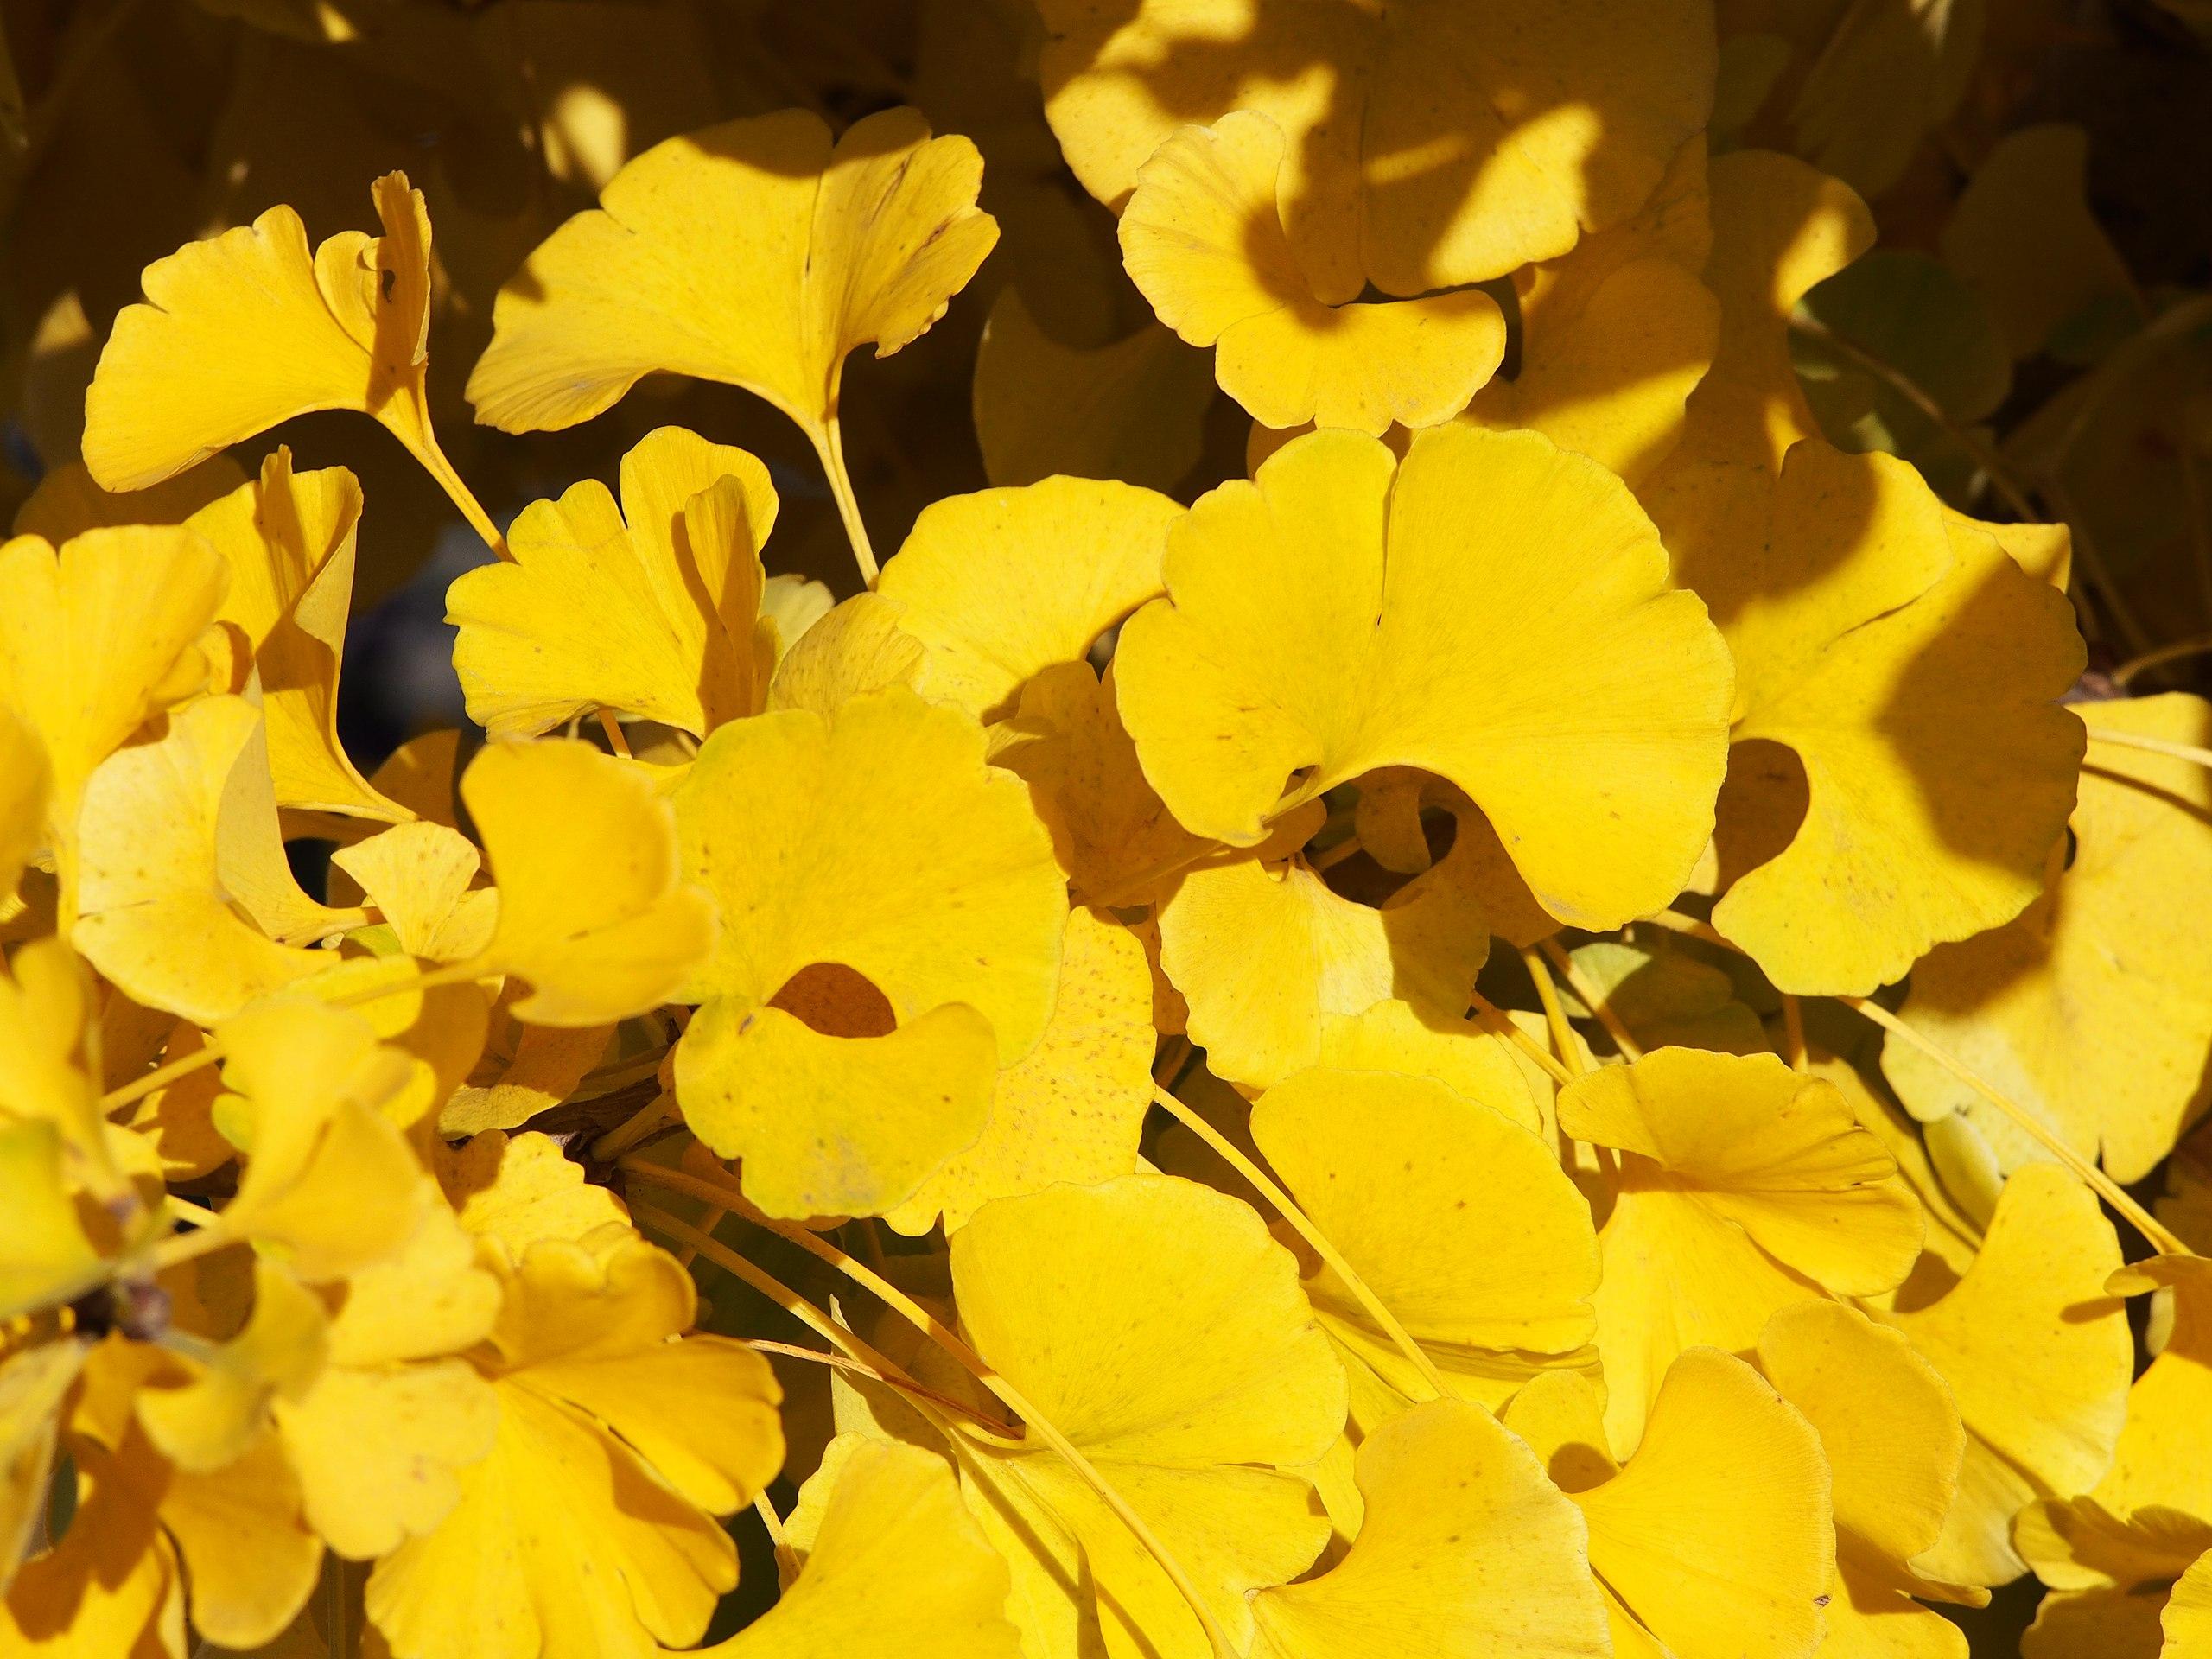 Yellow leaves with yellow stems